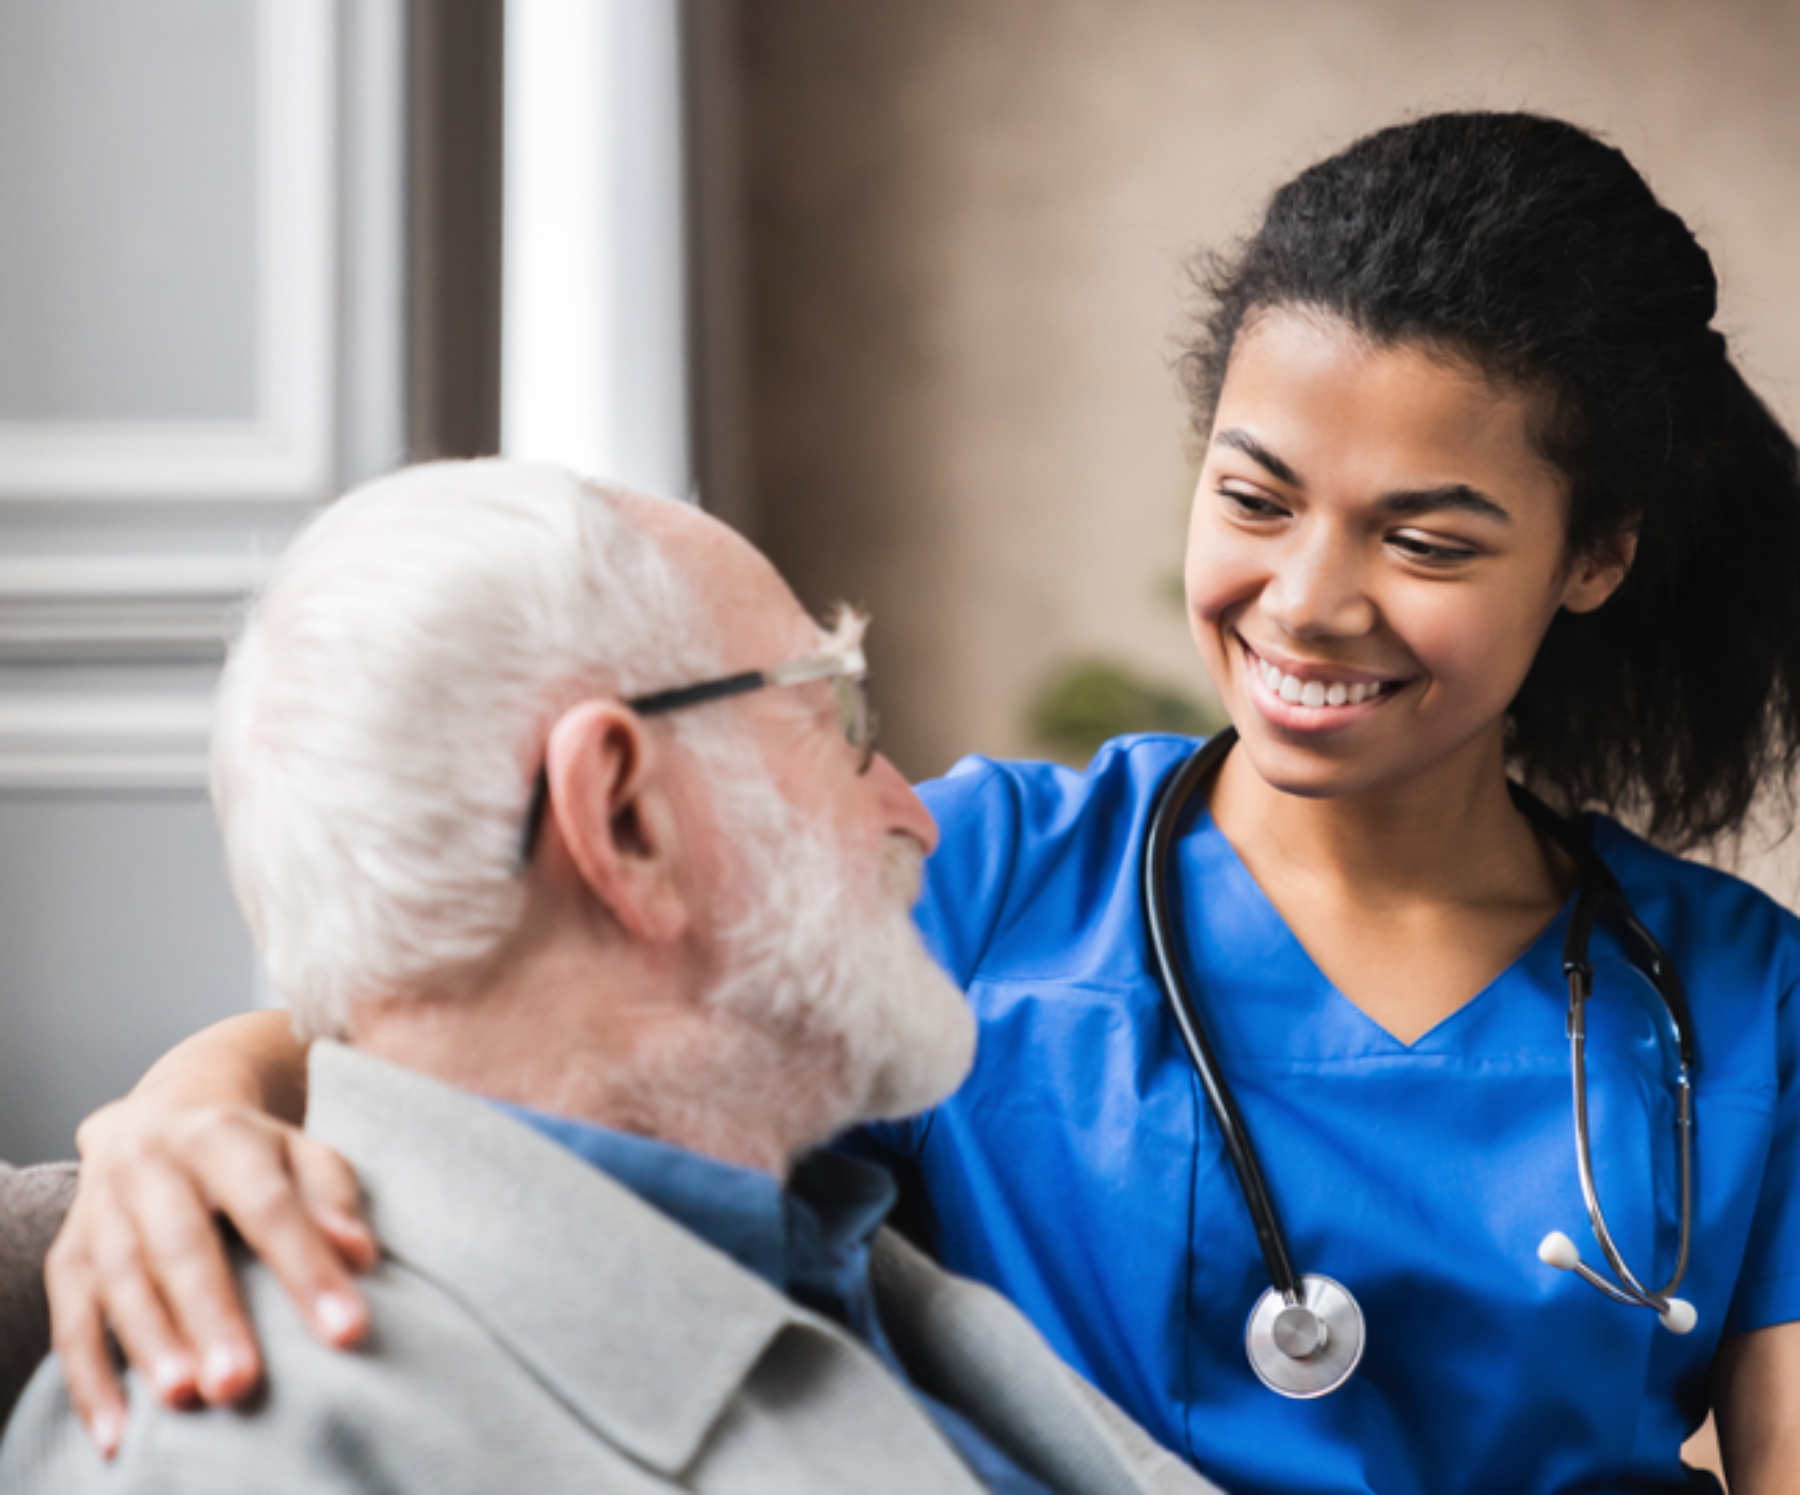 Smiling healthcare professional with arm around the shoulder of an older adult patient.